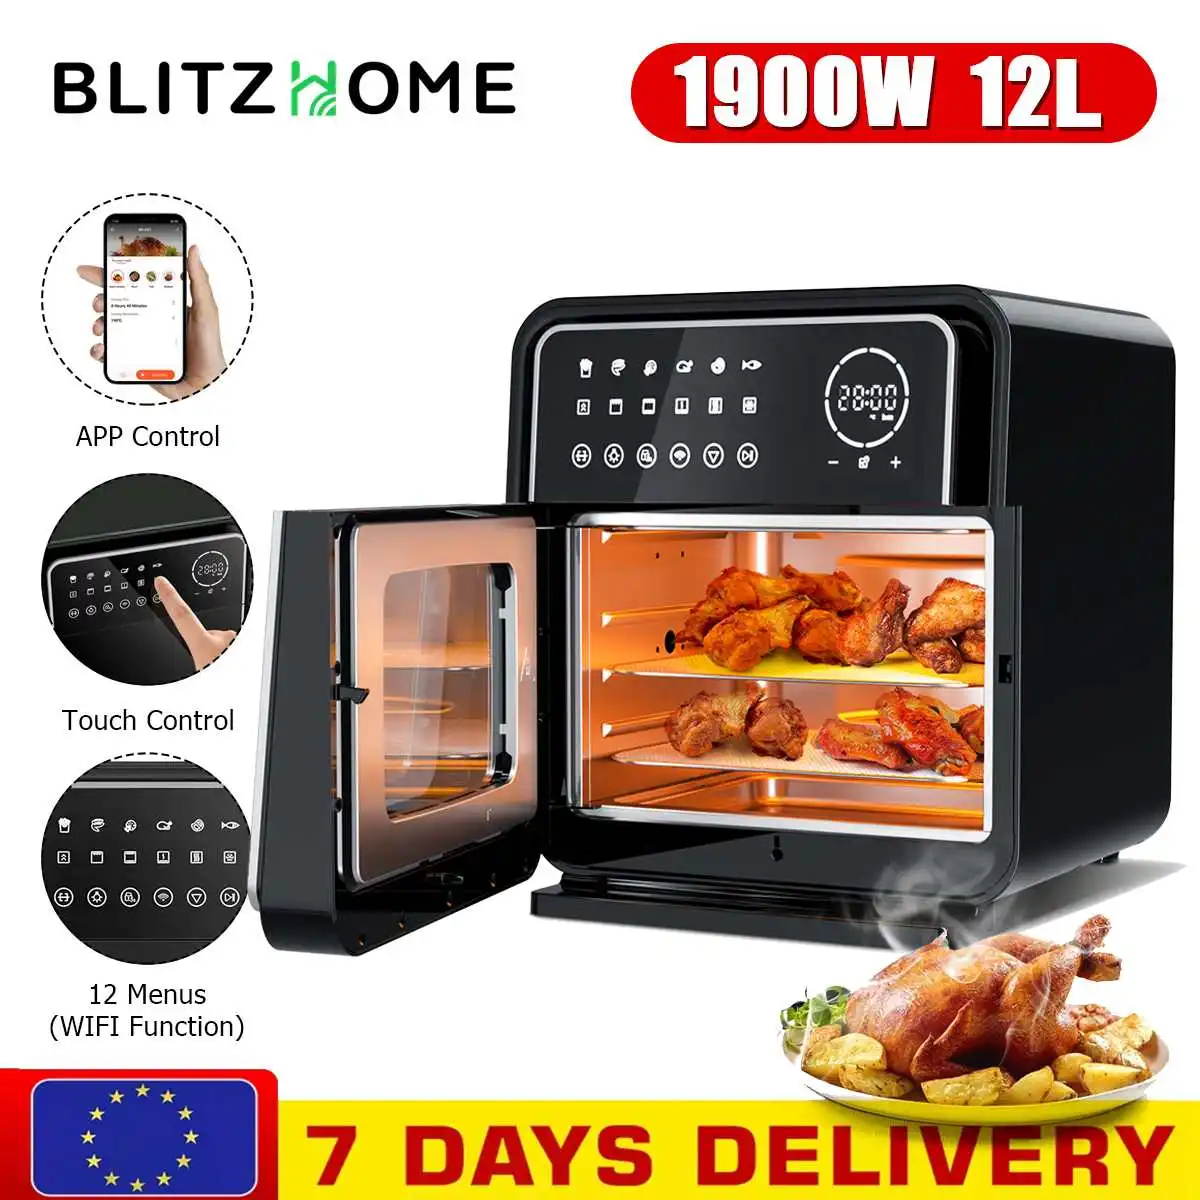 

BlitzHome 12L/13QT Electric Air Fryer Oven Rotisserie Dehydrator Toaster LED Touchscreen Large Capacity Chicken Frying Machine